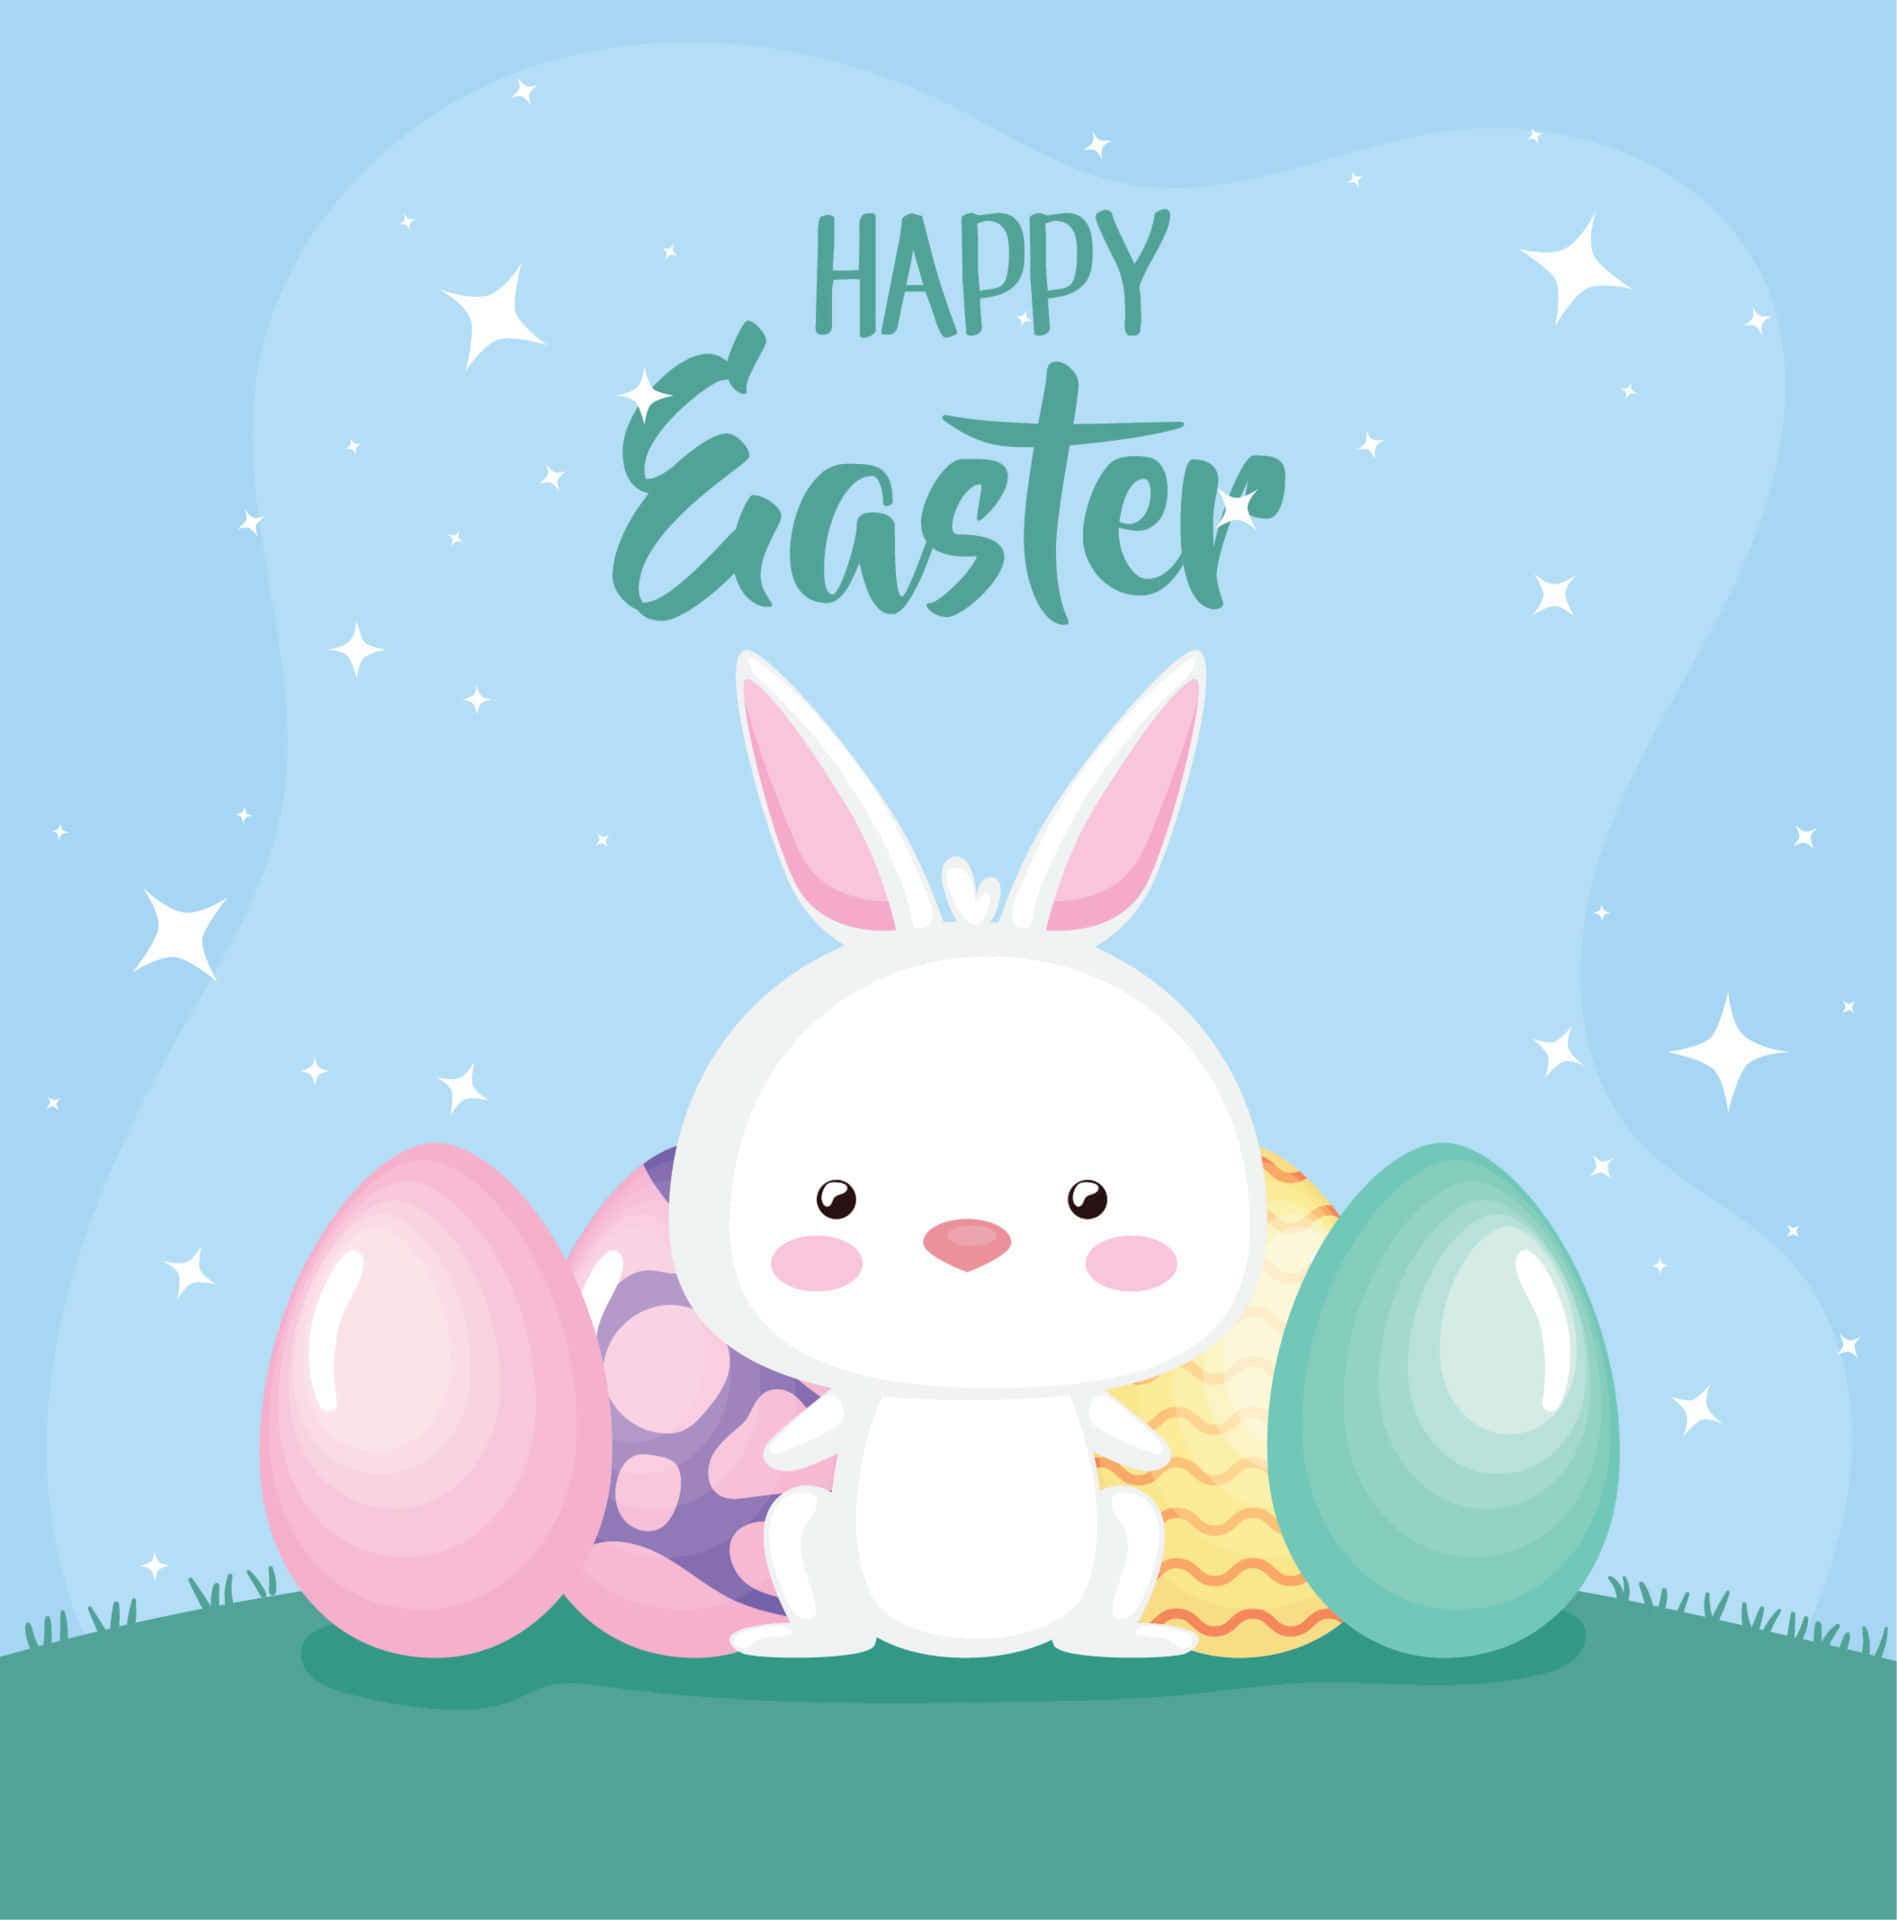 Simple Yet Cute Easter Wallpapers You Must Have This Year - Women